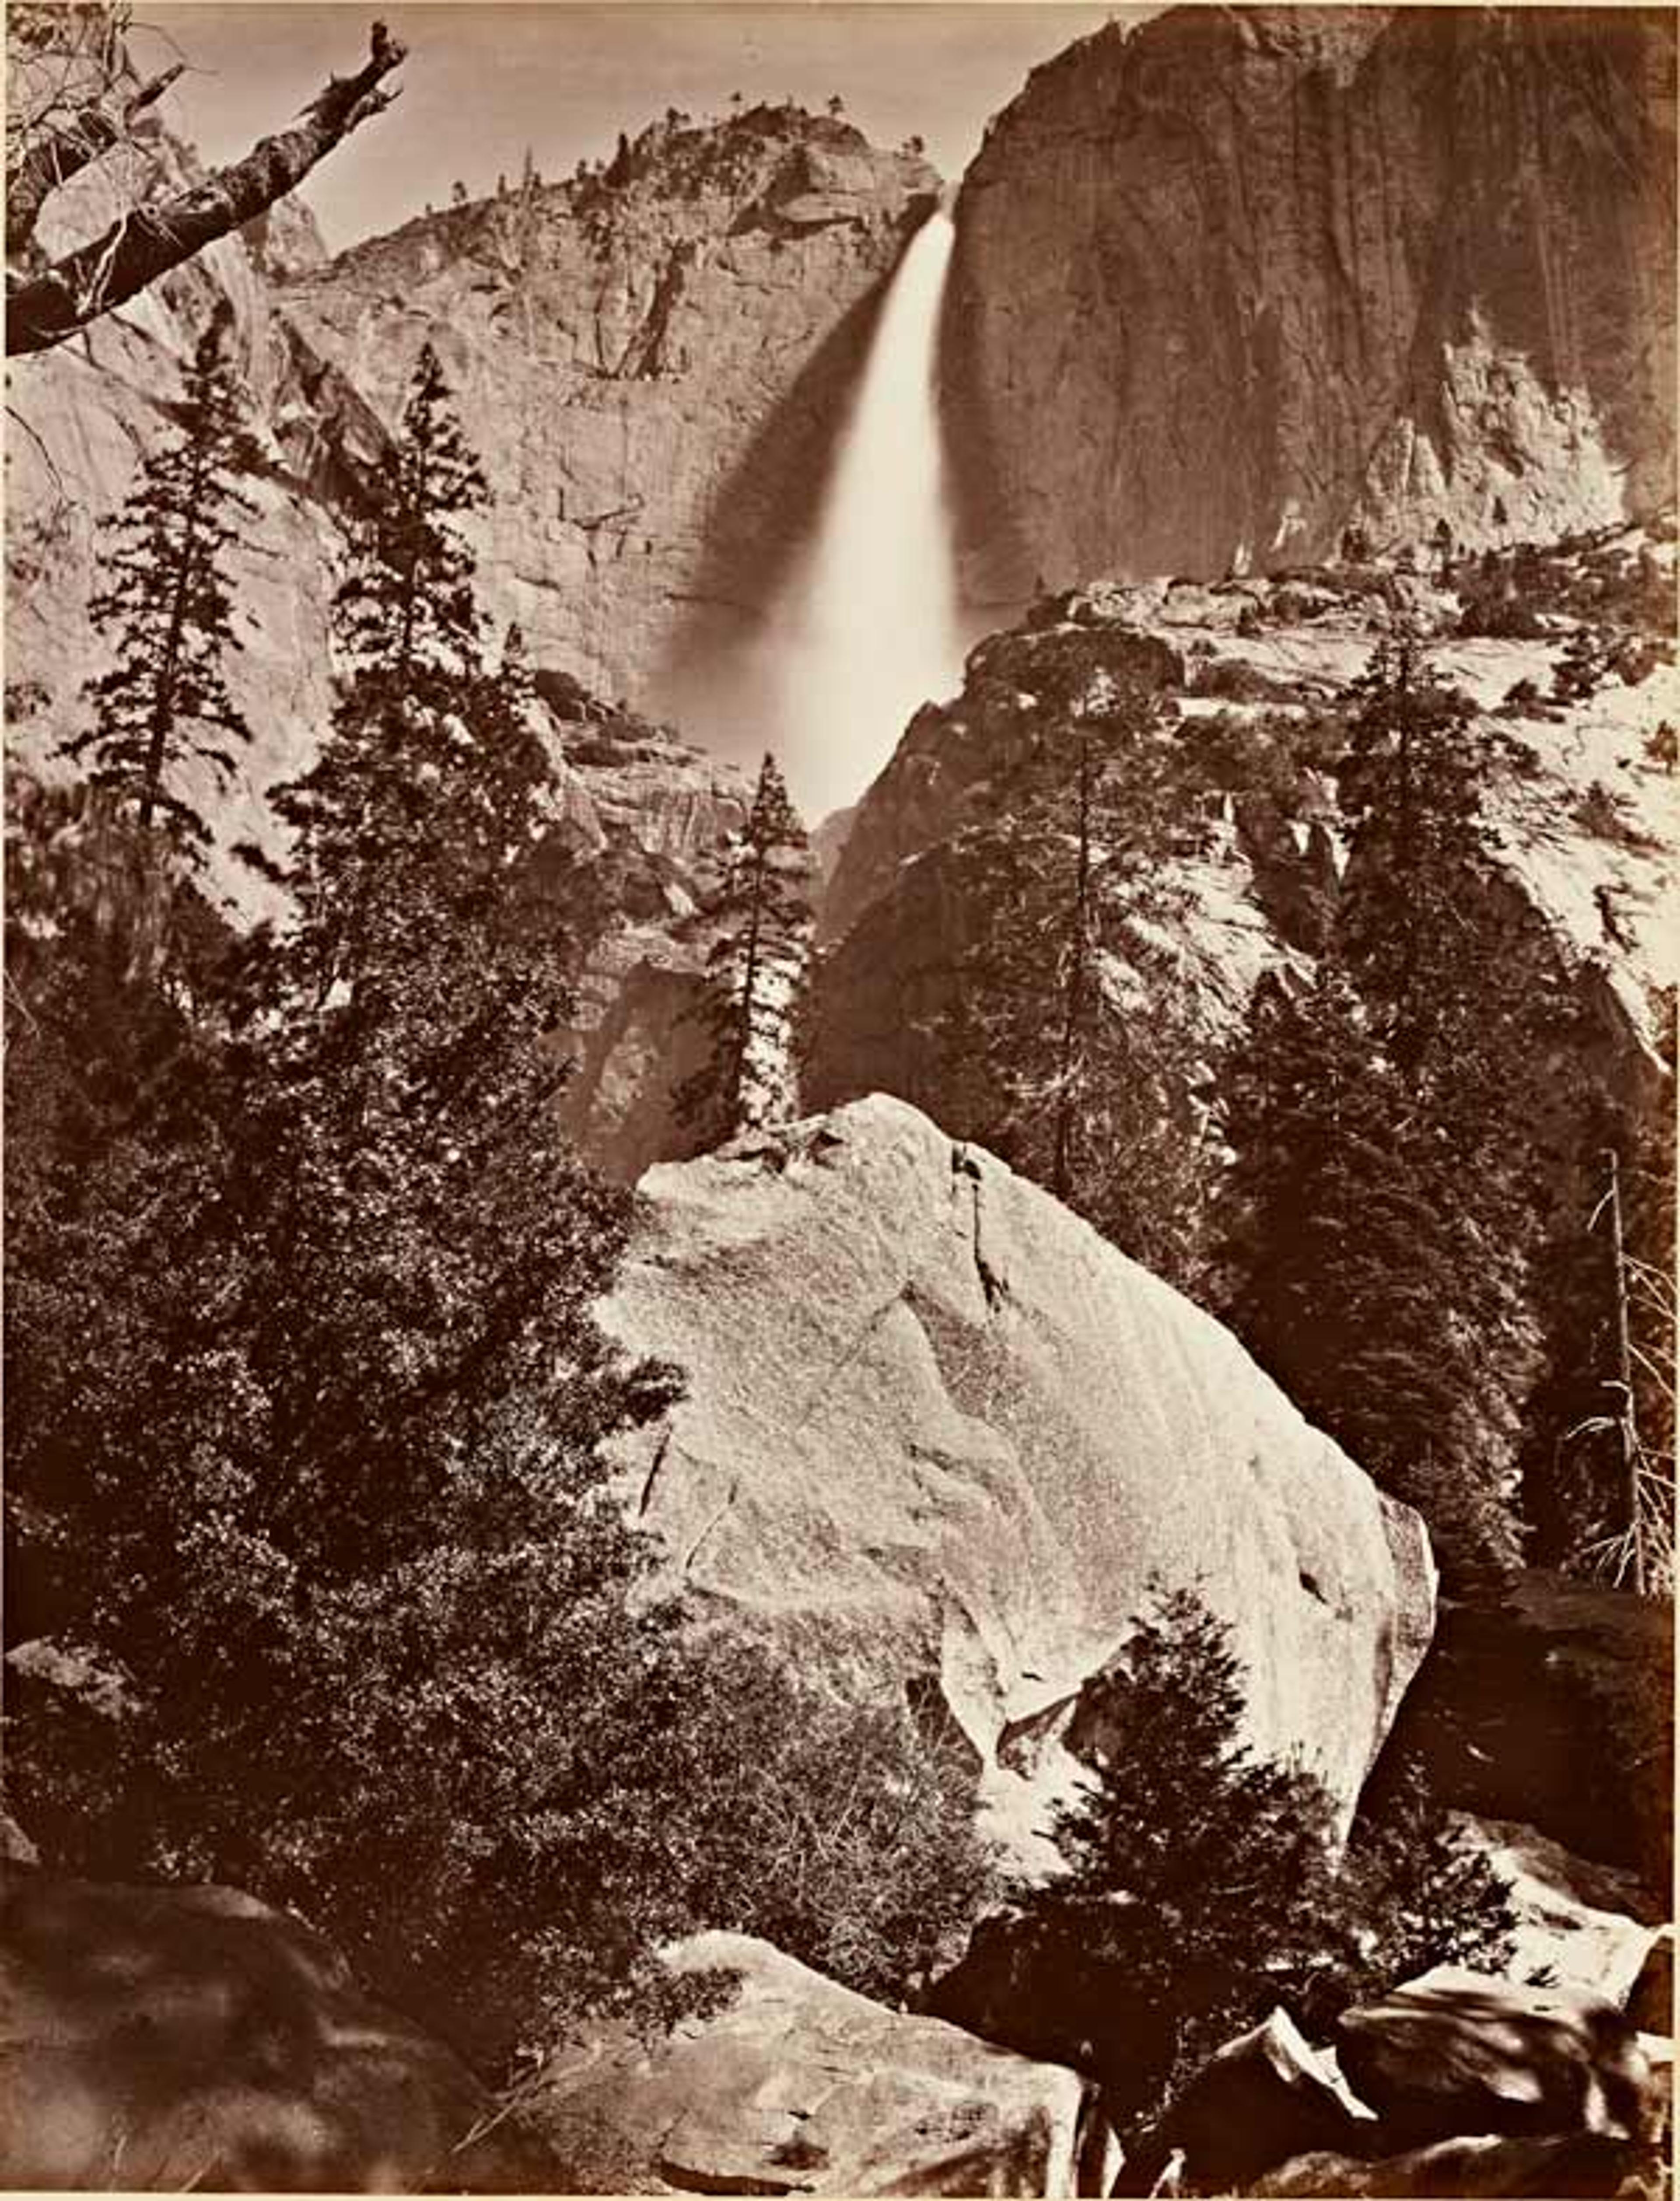 Carleton Watkins (American, 1829–1916). Upper Yosemite Fall, Yosemite, 1865–66. Albumen silver print from glass negative. Lent by Department of Special Collections, Stanford University Libraries